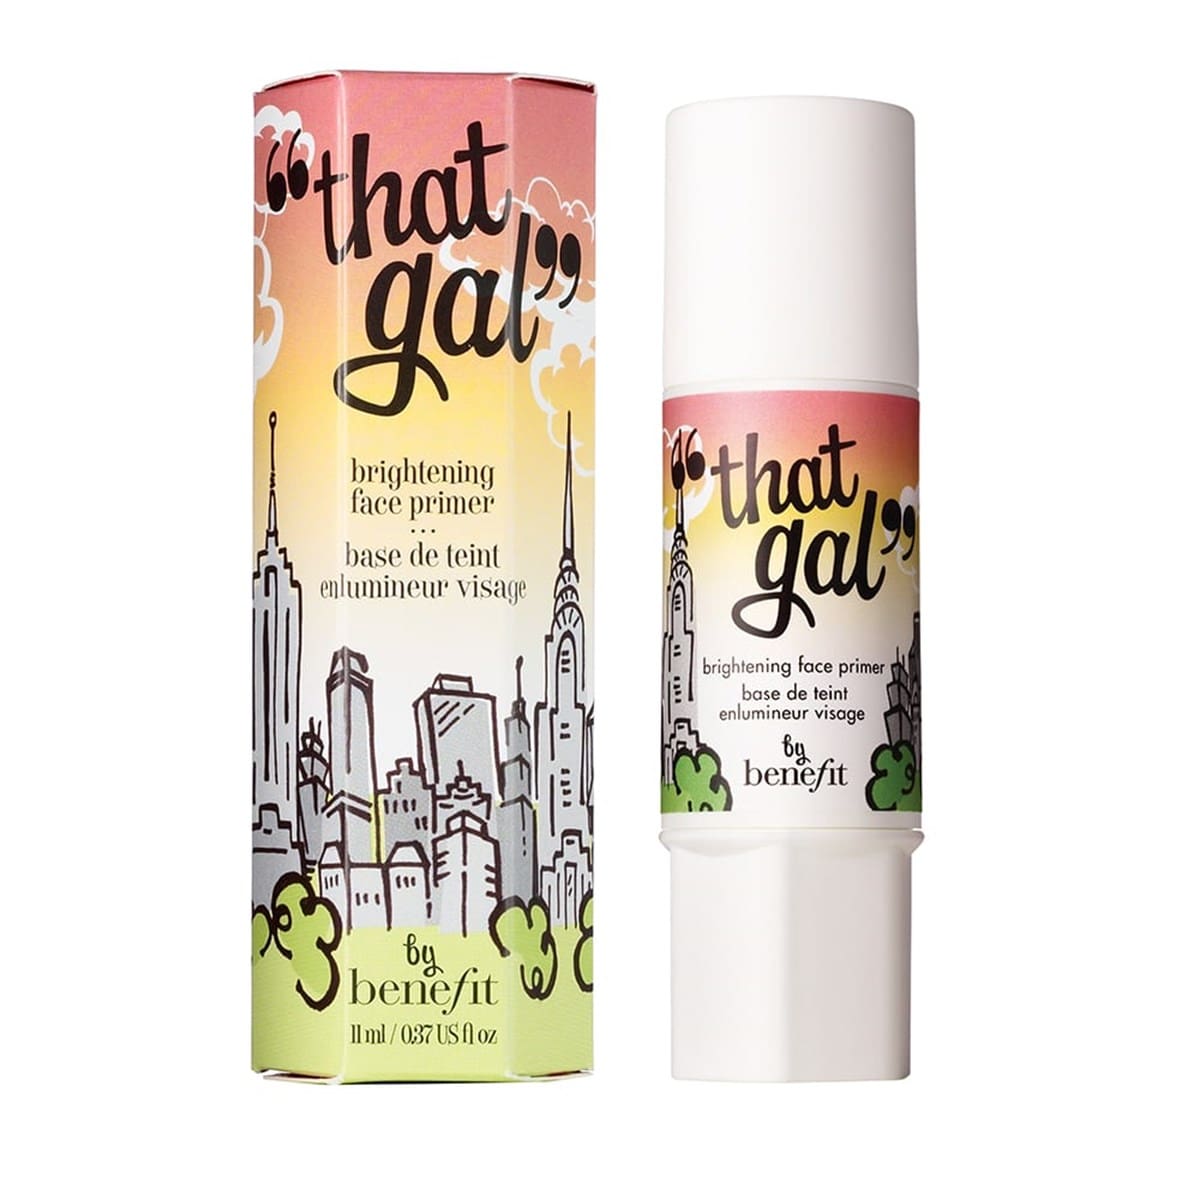 "That Gal" Brightening Face Primer Brightening face primer by Benefit